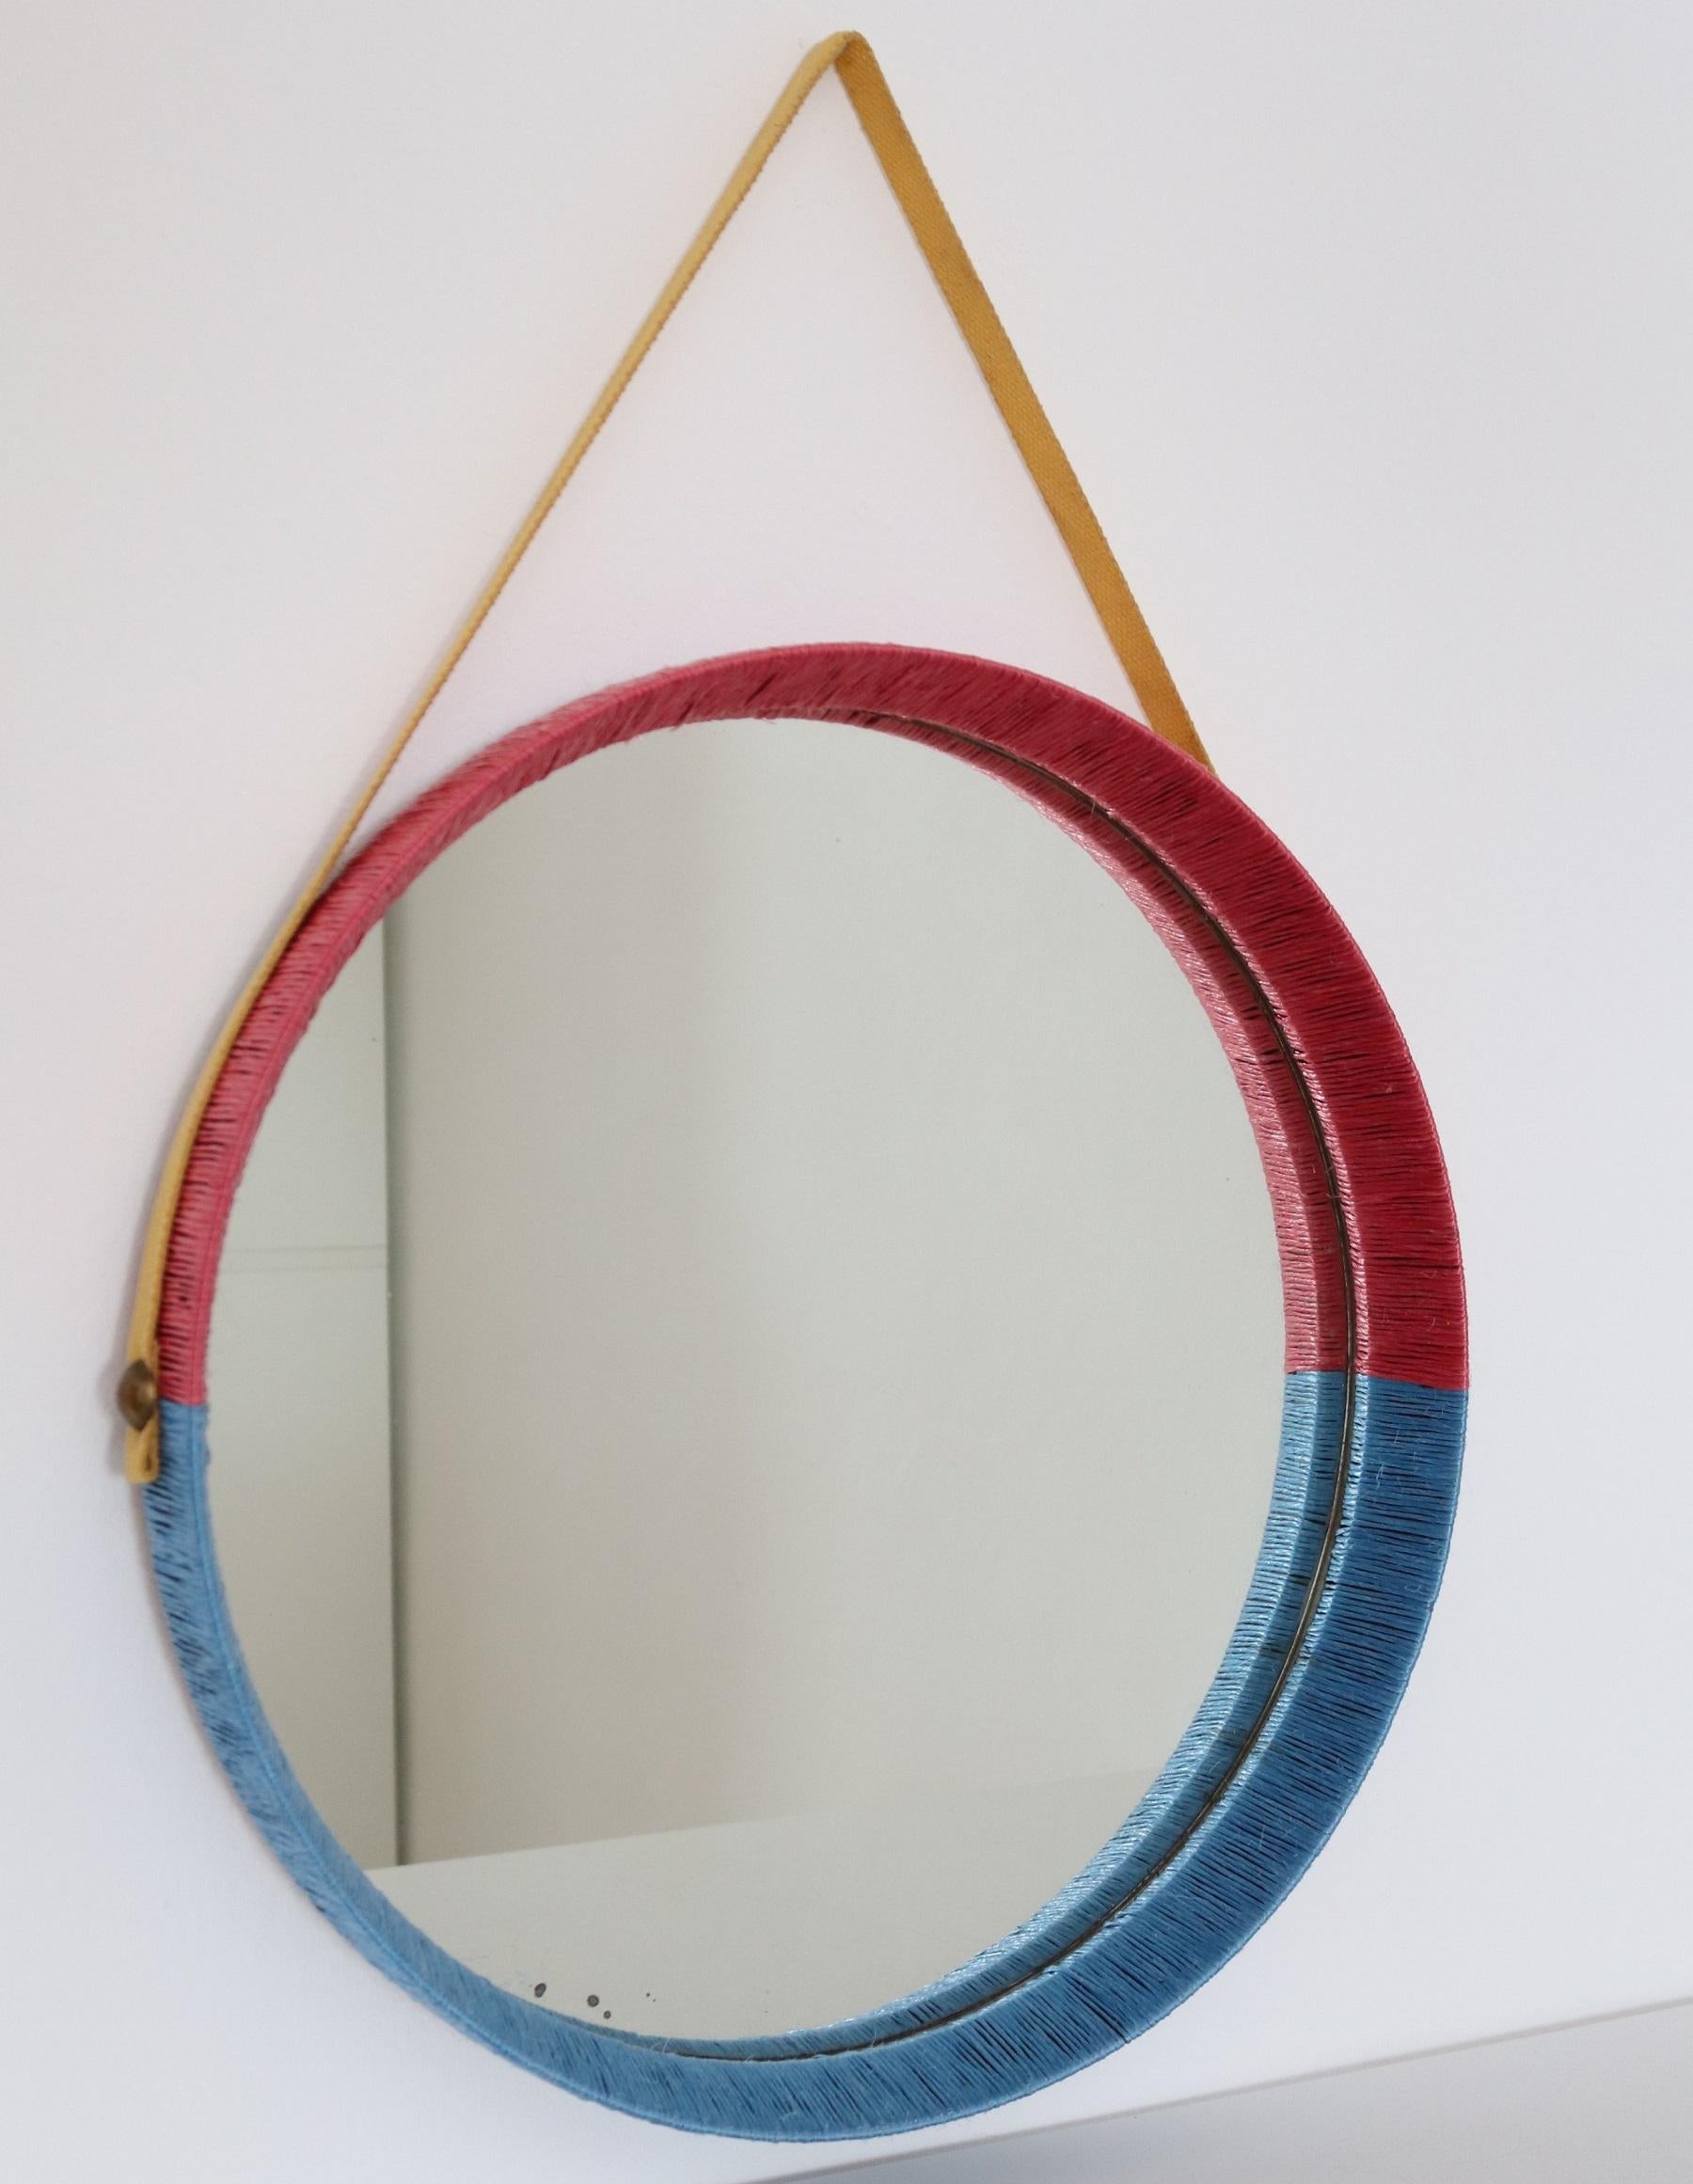 Italian Midcentury Wall Mirror in Red and Blue with Yellow Ribbon, 1950s For Sale 4